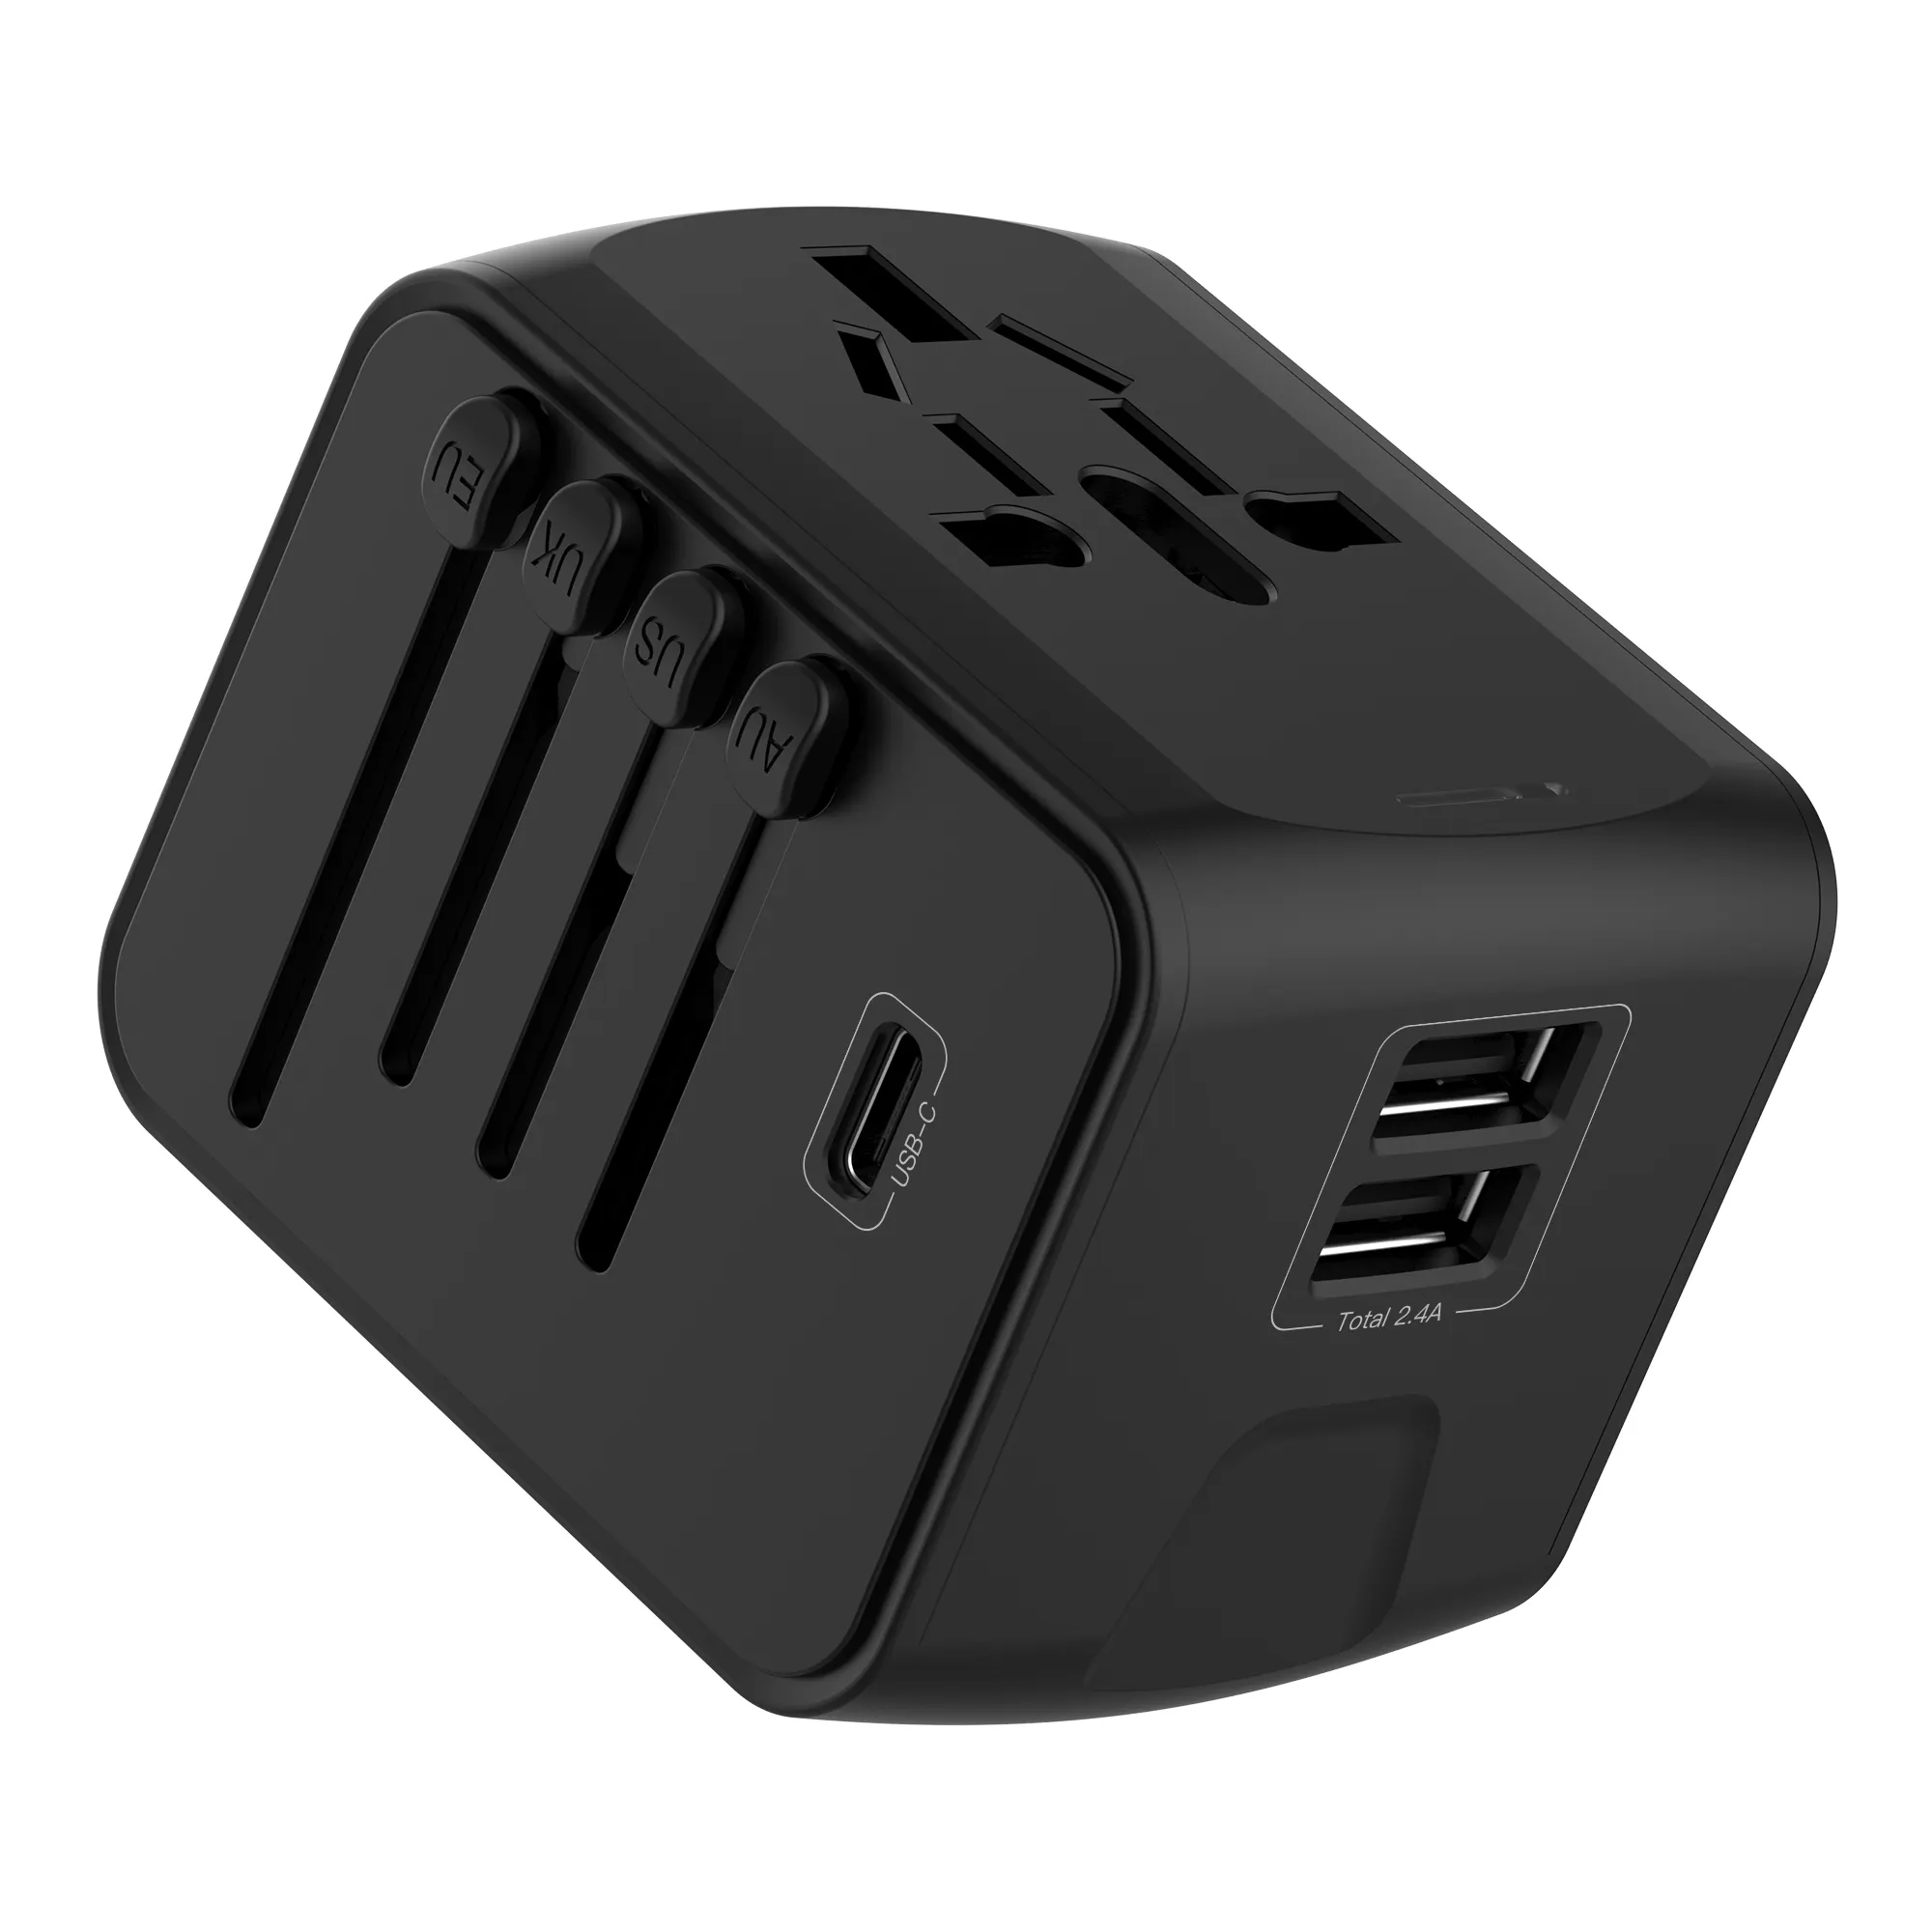 Universal Travel Adapter All in One Worldwide International Power Converters Wall Charger Power Plug Adapter for USA EU UK AUS